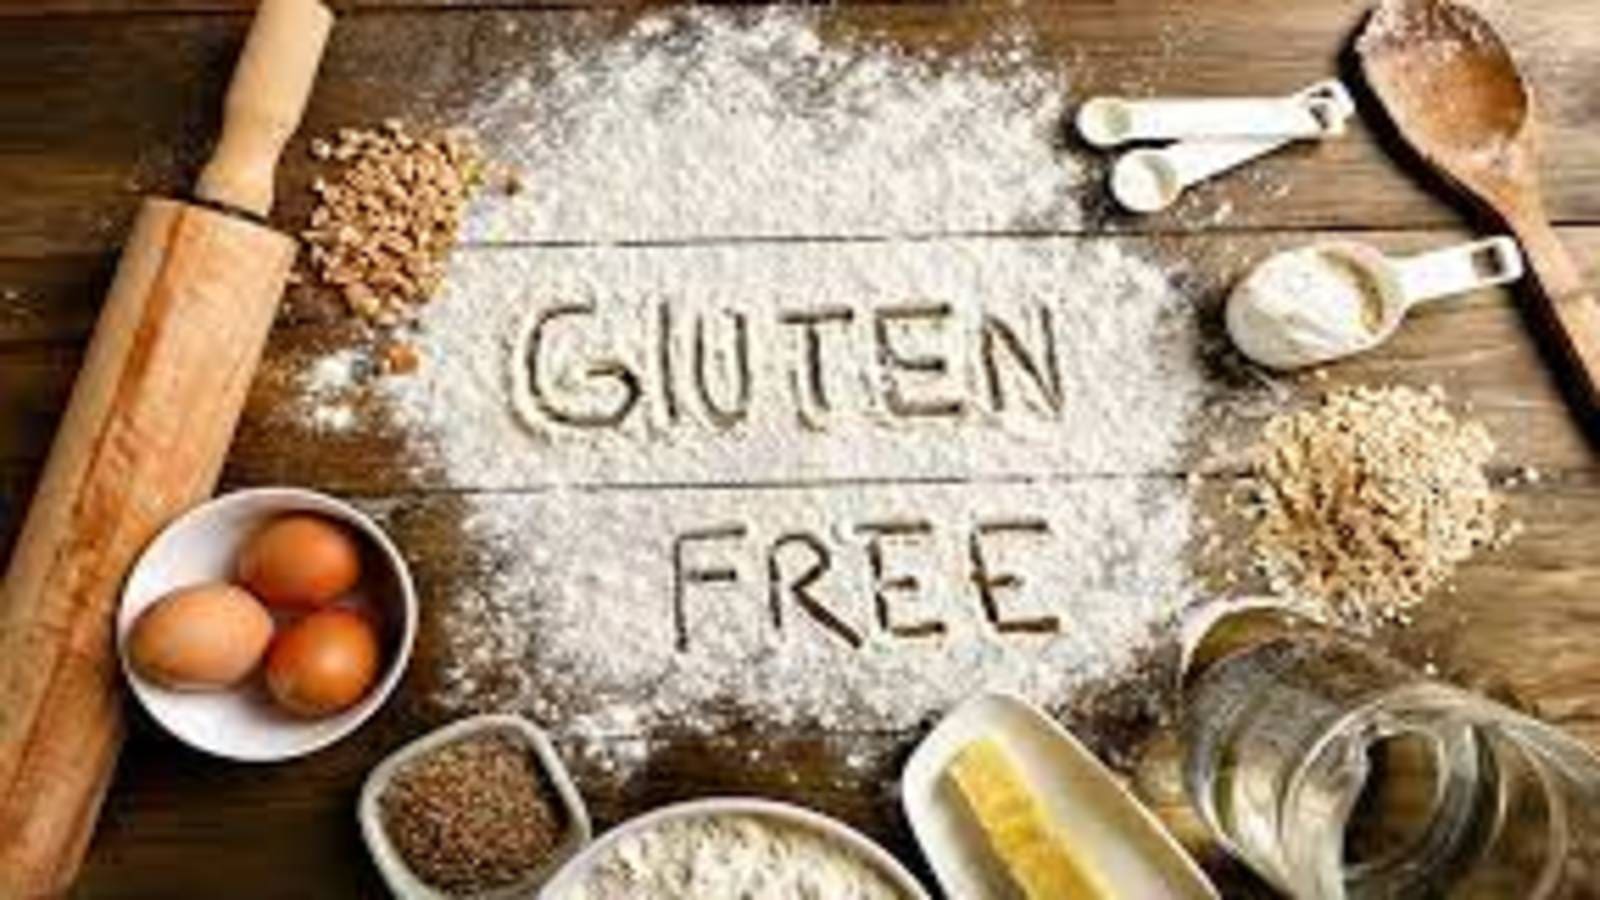 Time runs out for compliance with FDA Final Rule on Gluten-Free Labeling